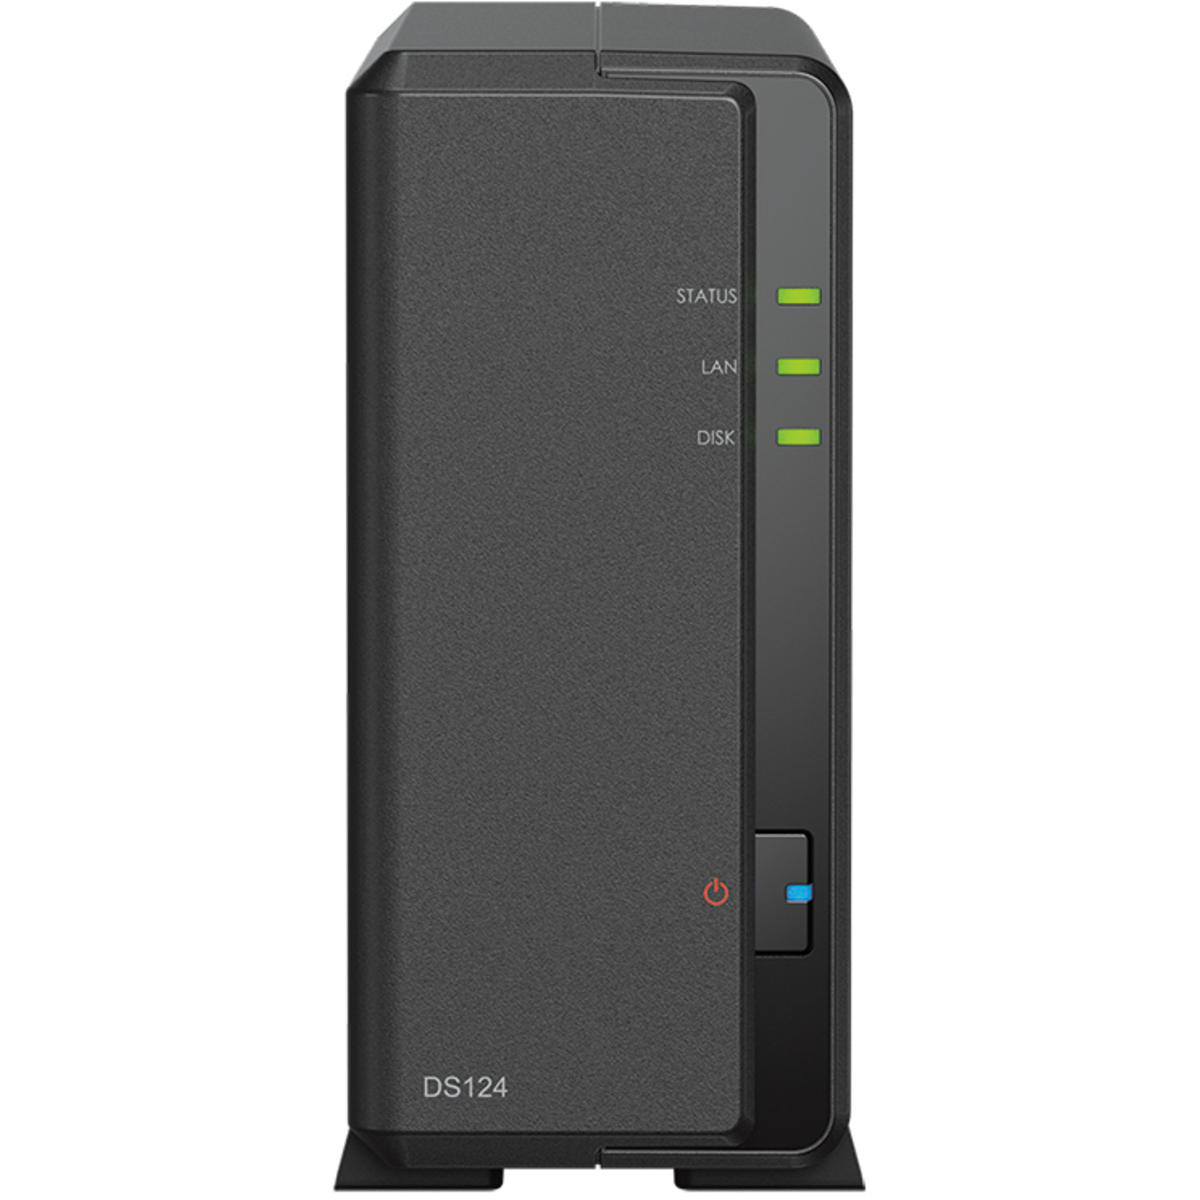 Synology DiskStation DS124 22tb 1-Bay Desktop Personal / Basic Home / Small Office NAS - Network Attached Storage Device 1x22tb Western Digital Ultrastar HC580 SED WUH722422ALE6L1 3.5 7200rpm SATA 6Gb/s HDD ENTERPRISE Class Drives Installed - Burn-In Tested DiskStation DS124